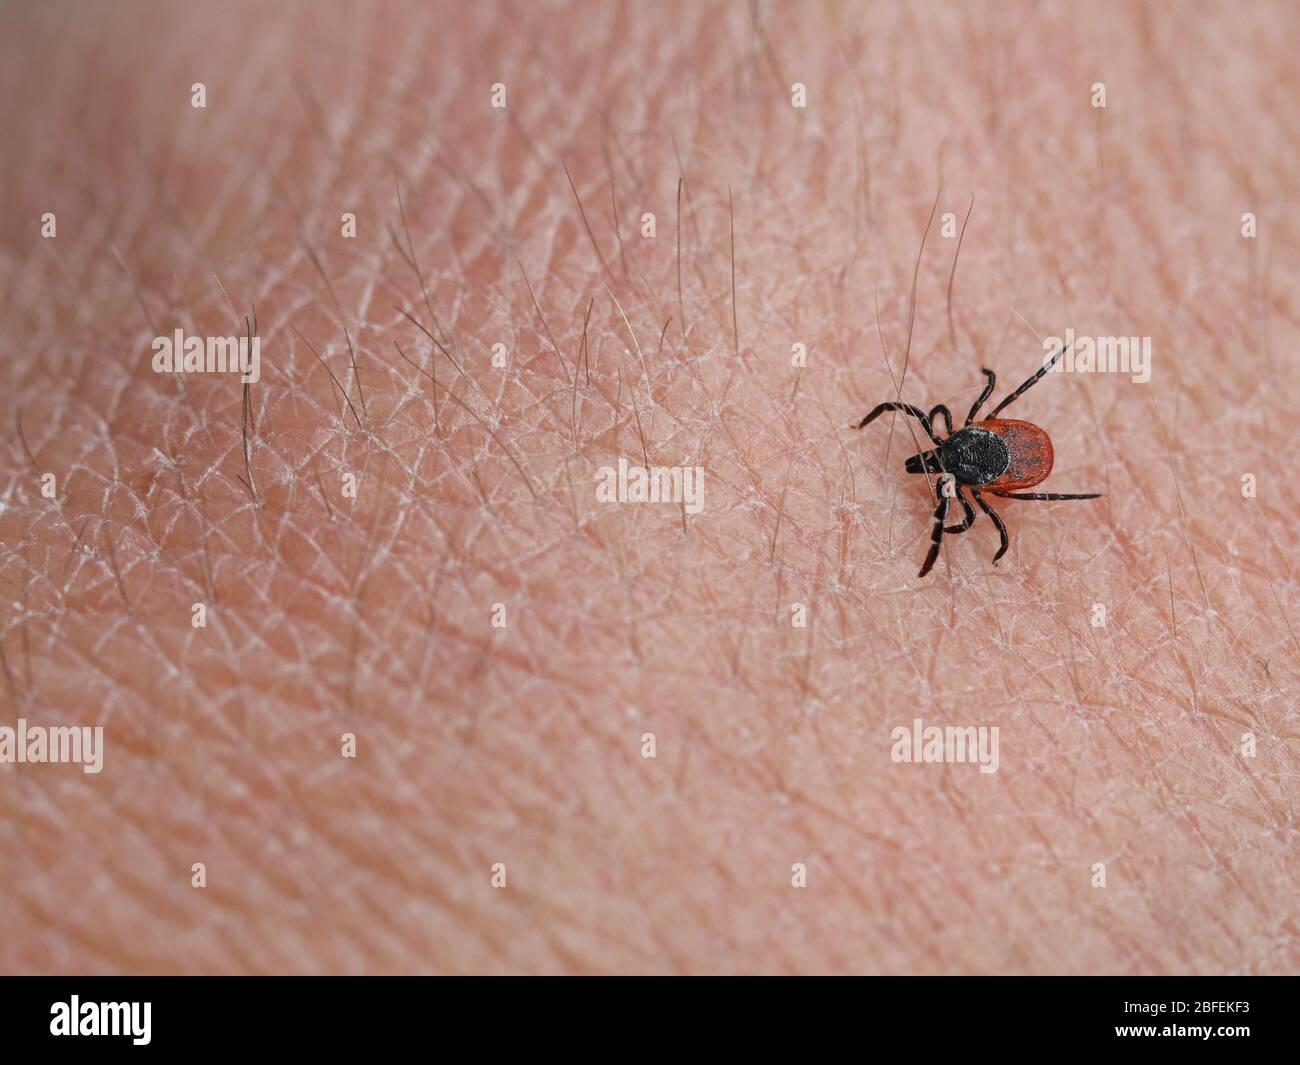 deer tick, ixodes ricinus, on human skin background with copy space Stock Photo